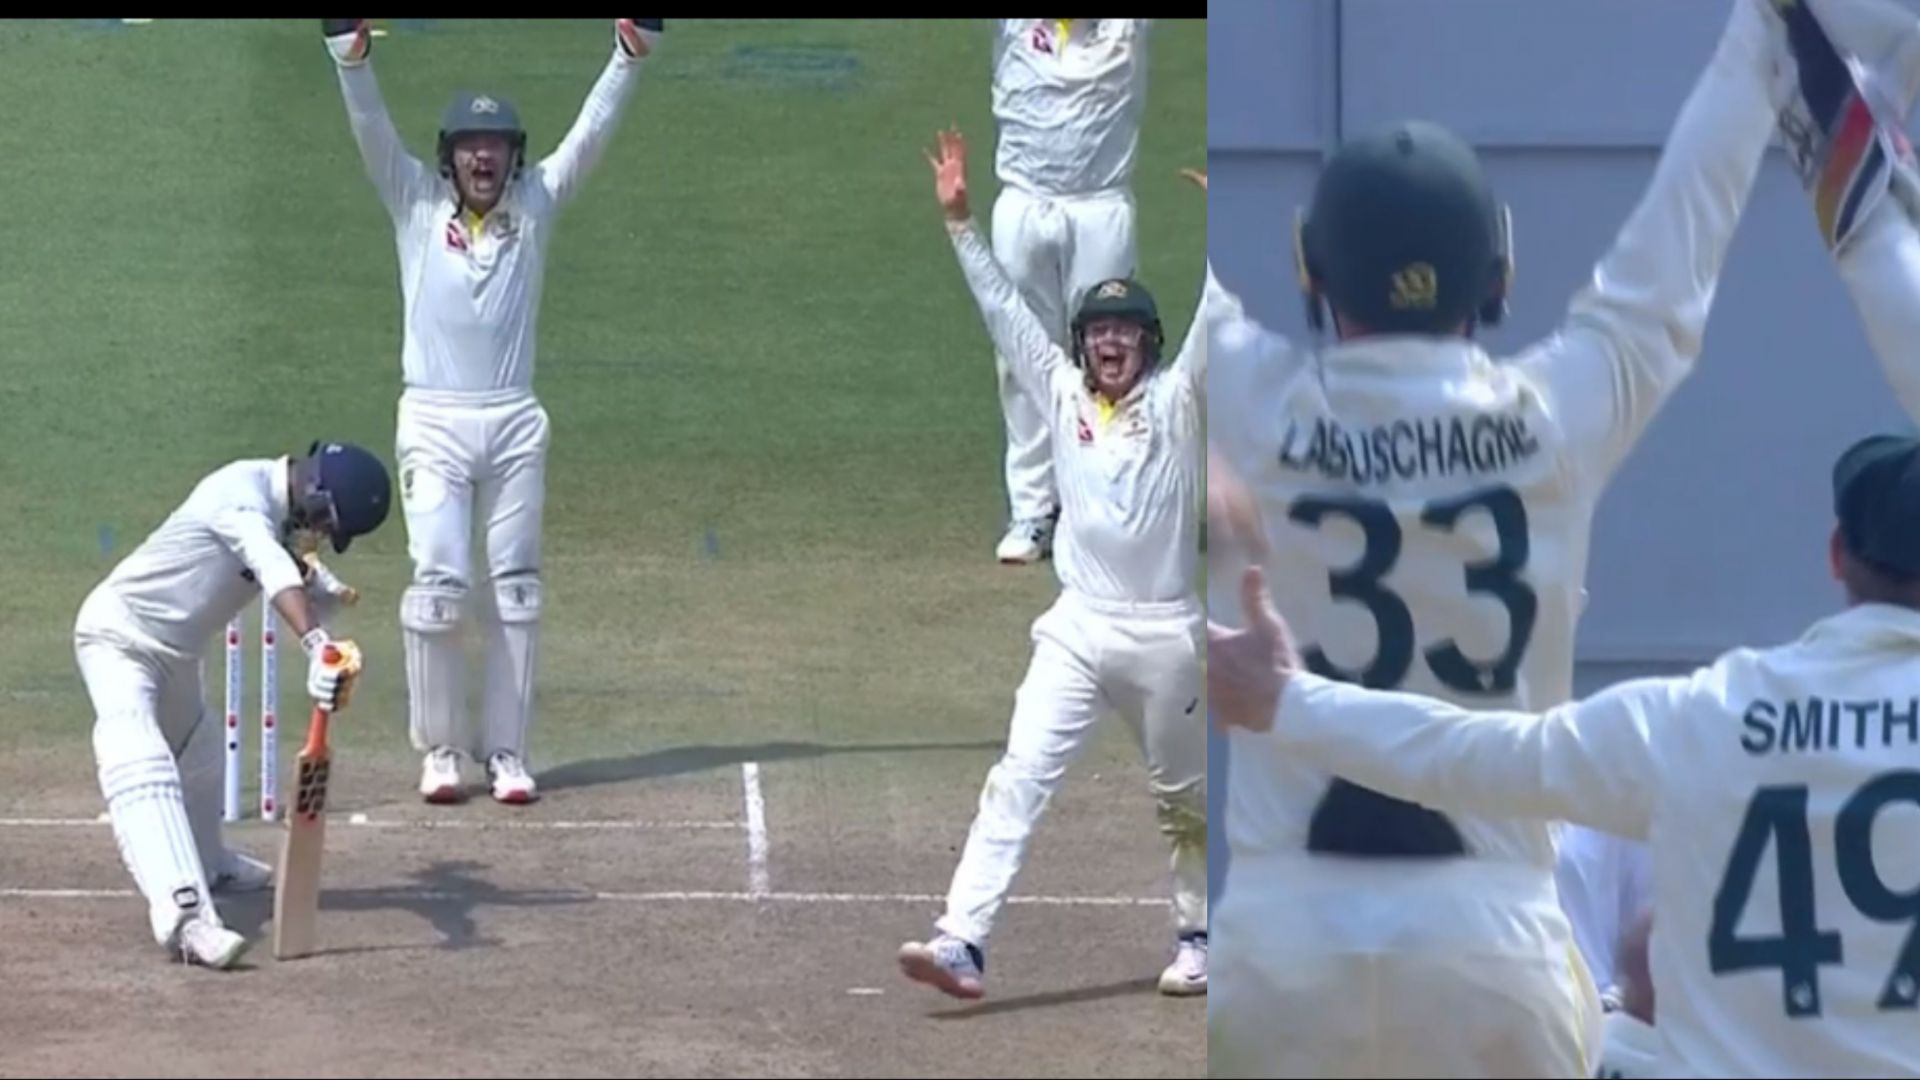 Australian cricketers were quite confident about the LBW appeal (Image: BCCI)